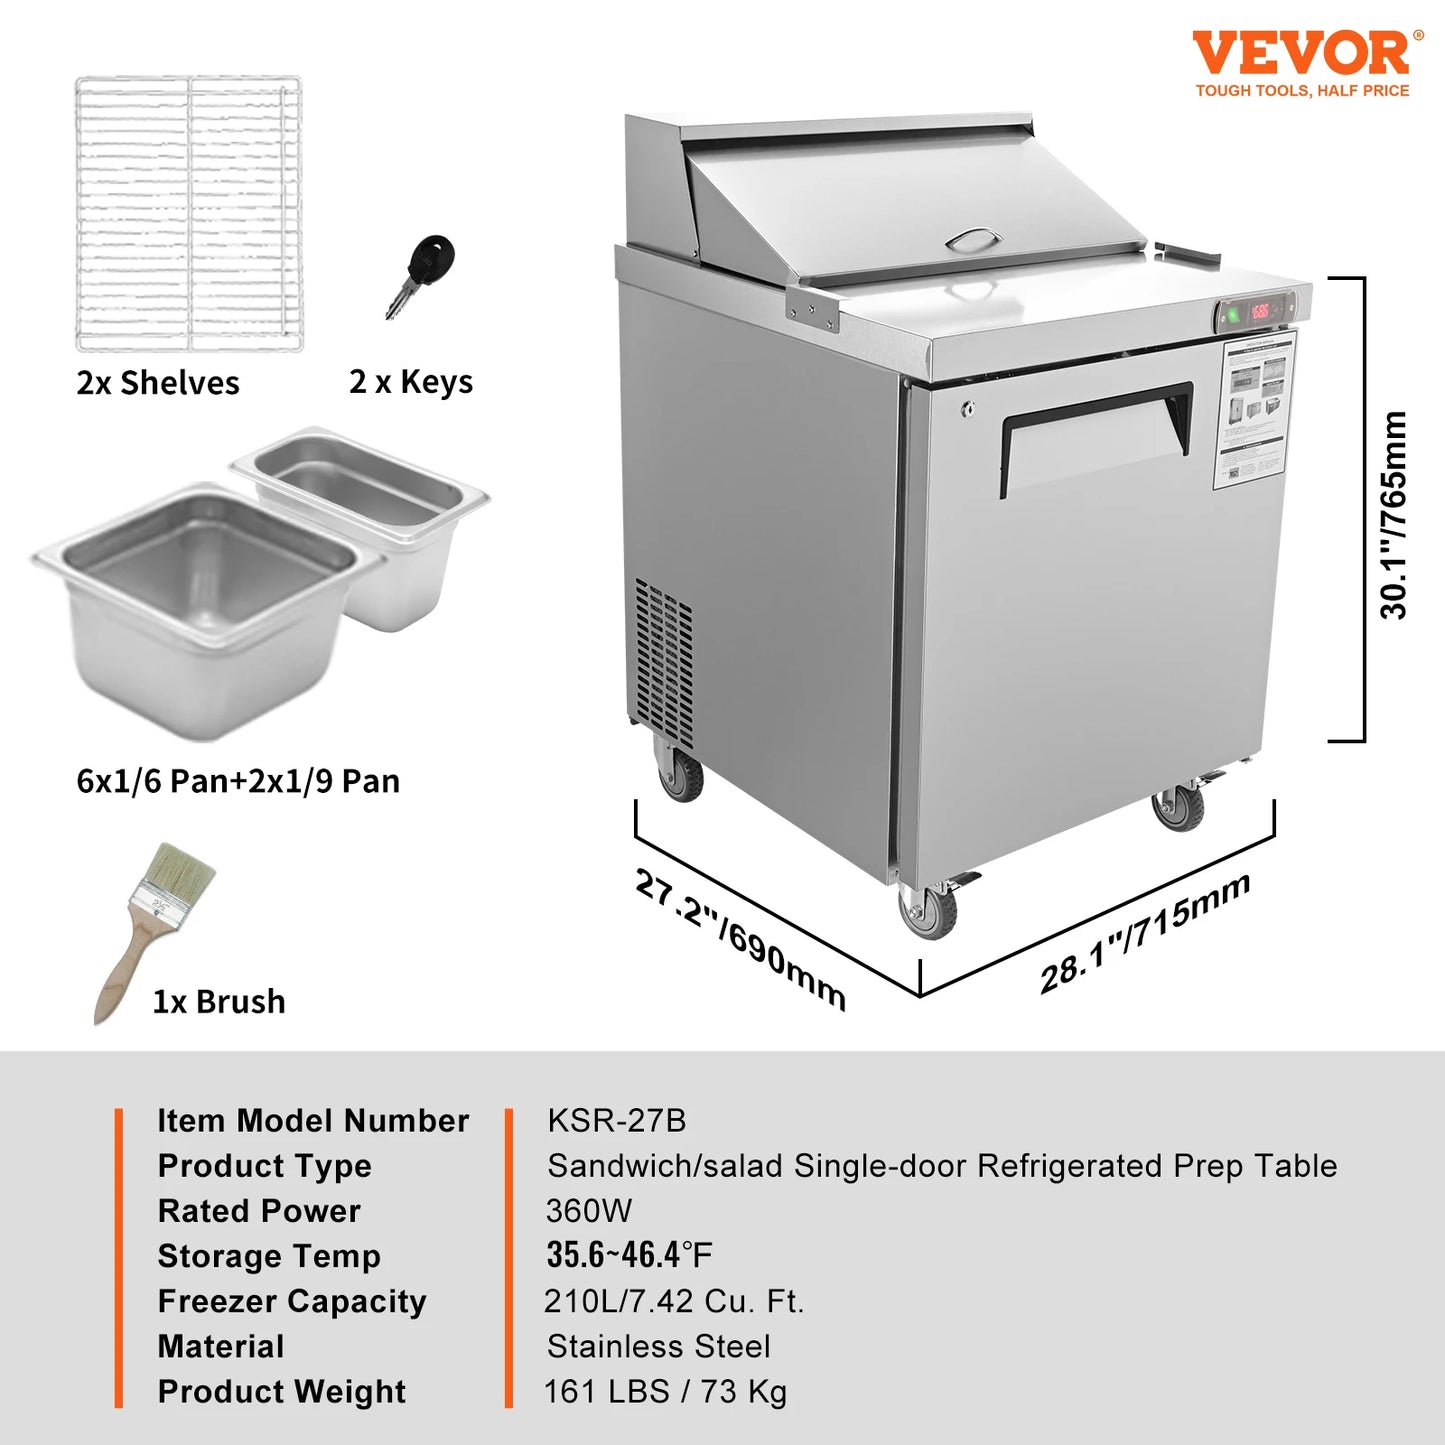 VEVOR 72" Sandwich & Salad Prep Table17.73 CuFt Stainless Steel Refrigerated Food Prep Station with 18 PansCut for Restaurant